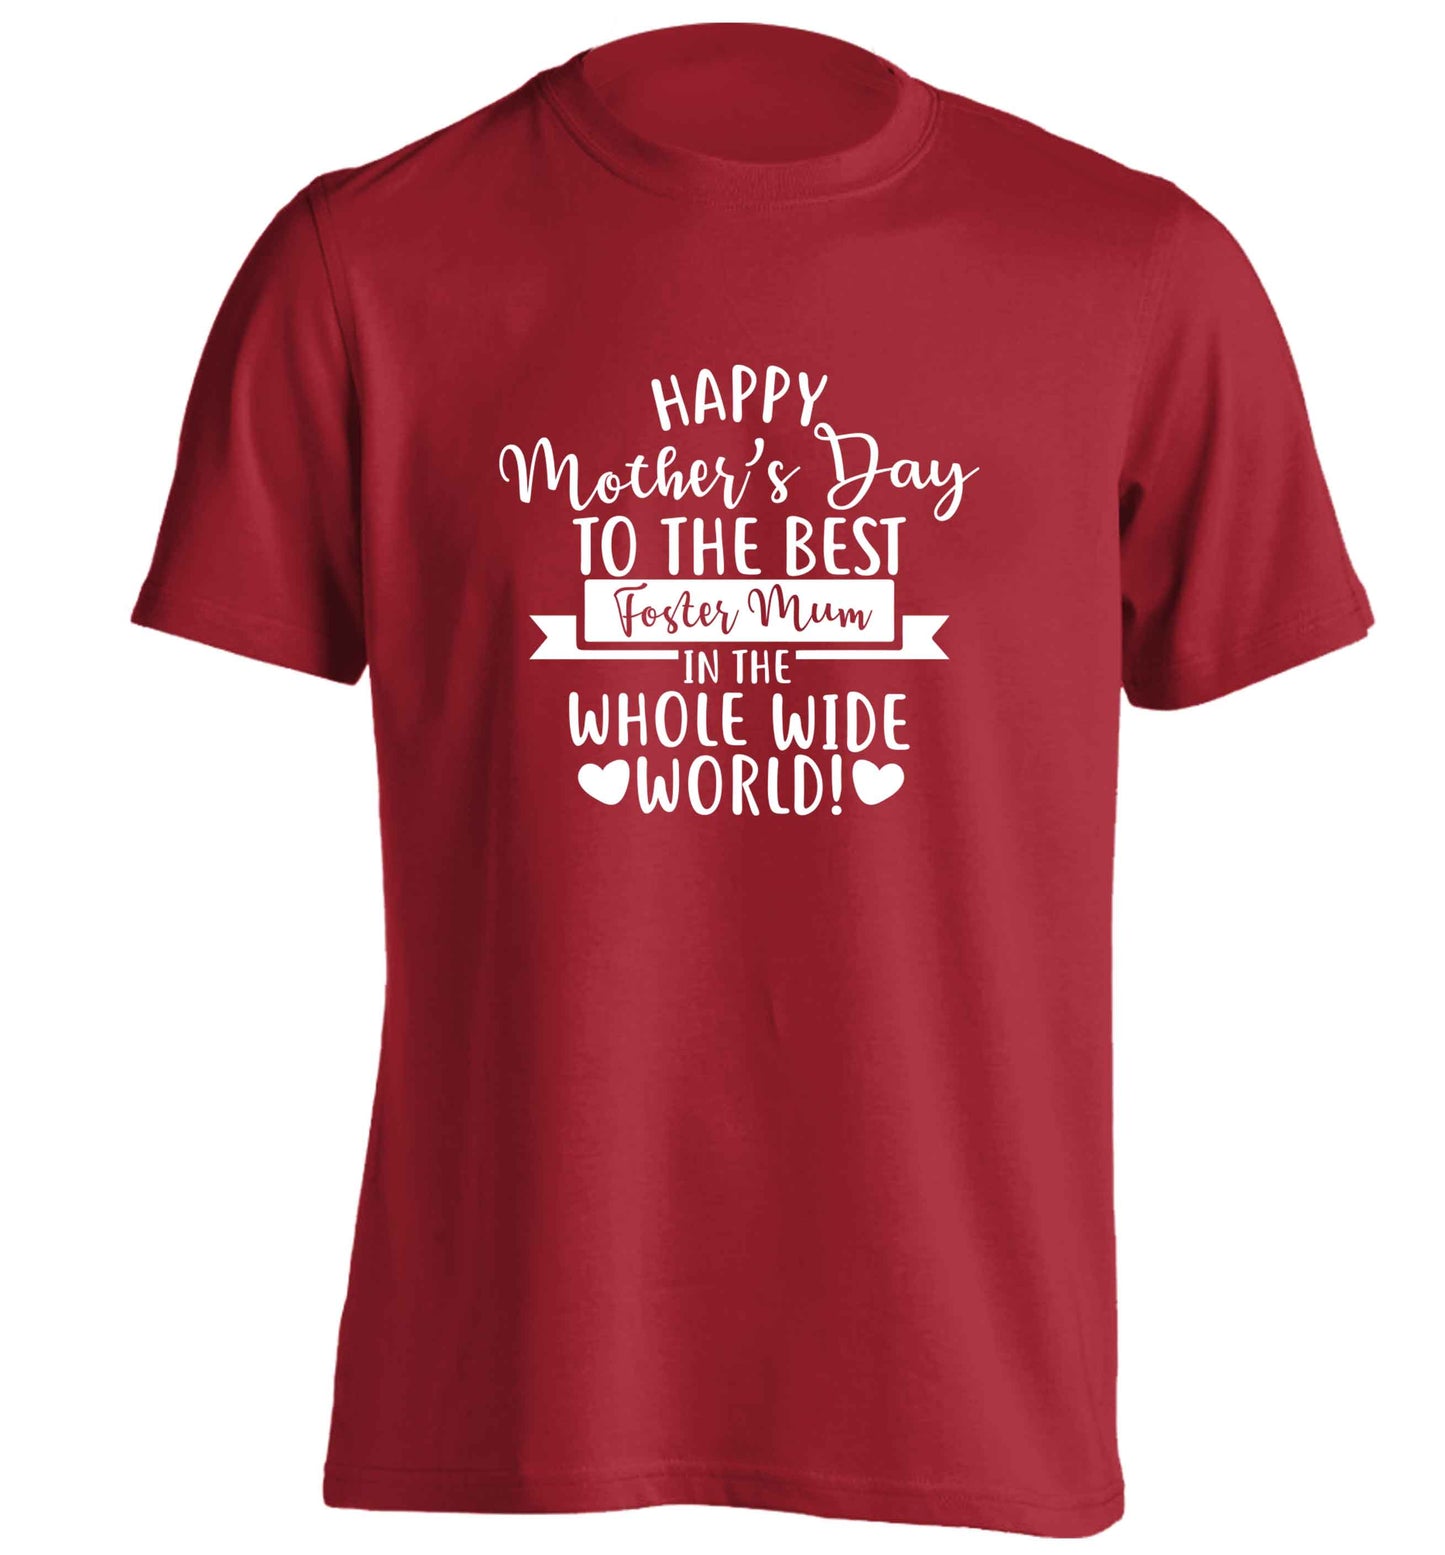 Happy mother's day to the best foster mum in the world adults unisex red Tshirt 2XL